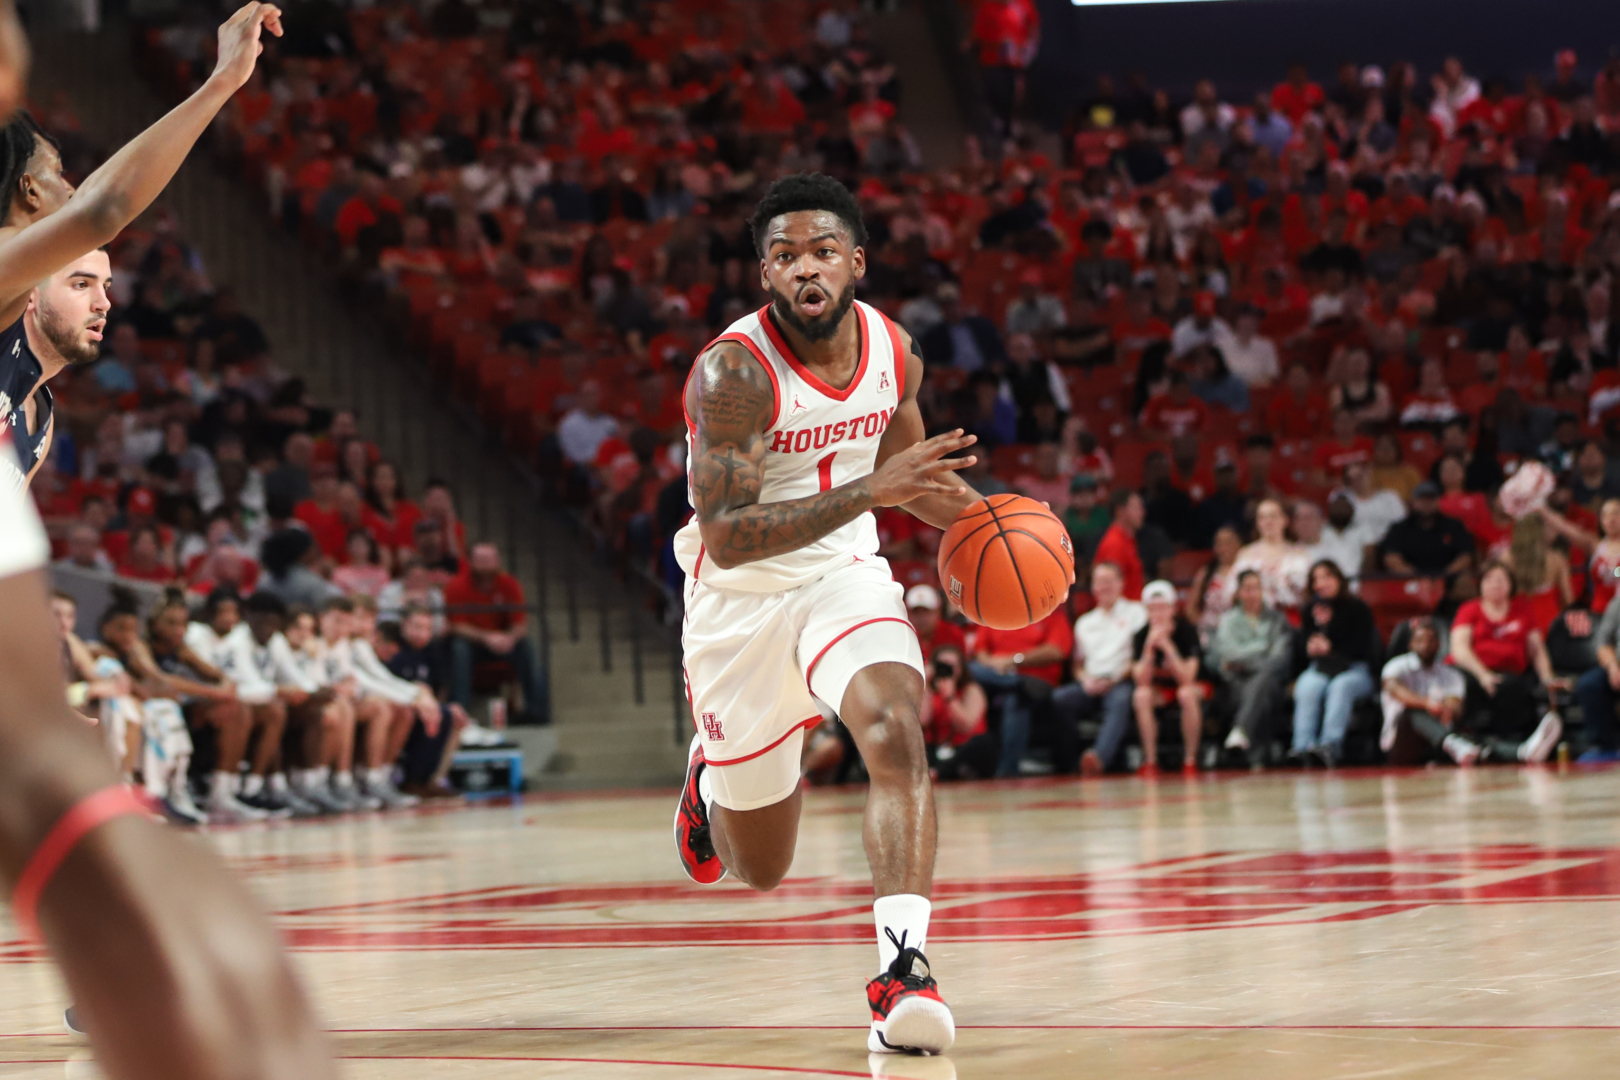 Junior point guard Jamal Shead leads UH with 56 assists through nine games this season. | Sean Thomas/The Cougar